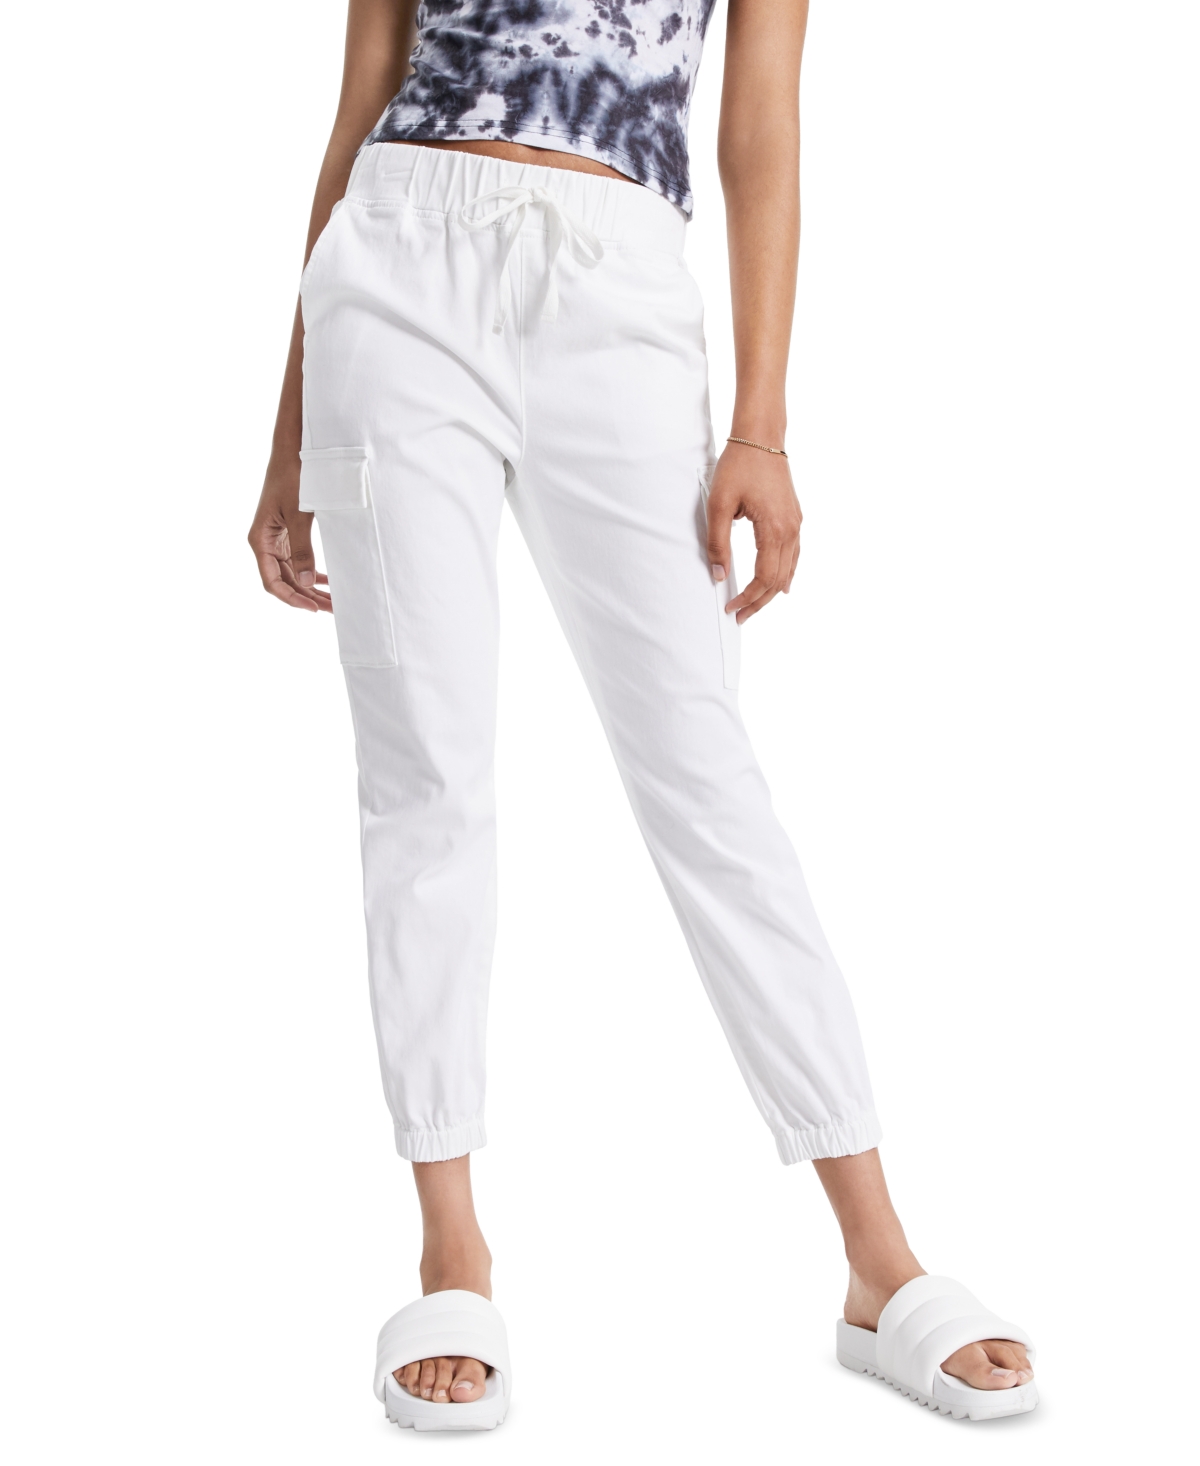 Tinseltown Juniors' High Waisted Pull On Utility Jogger Pants In Bright White